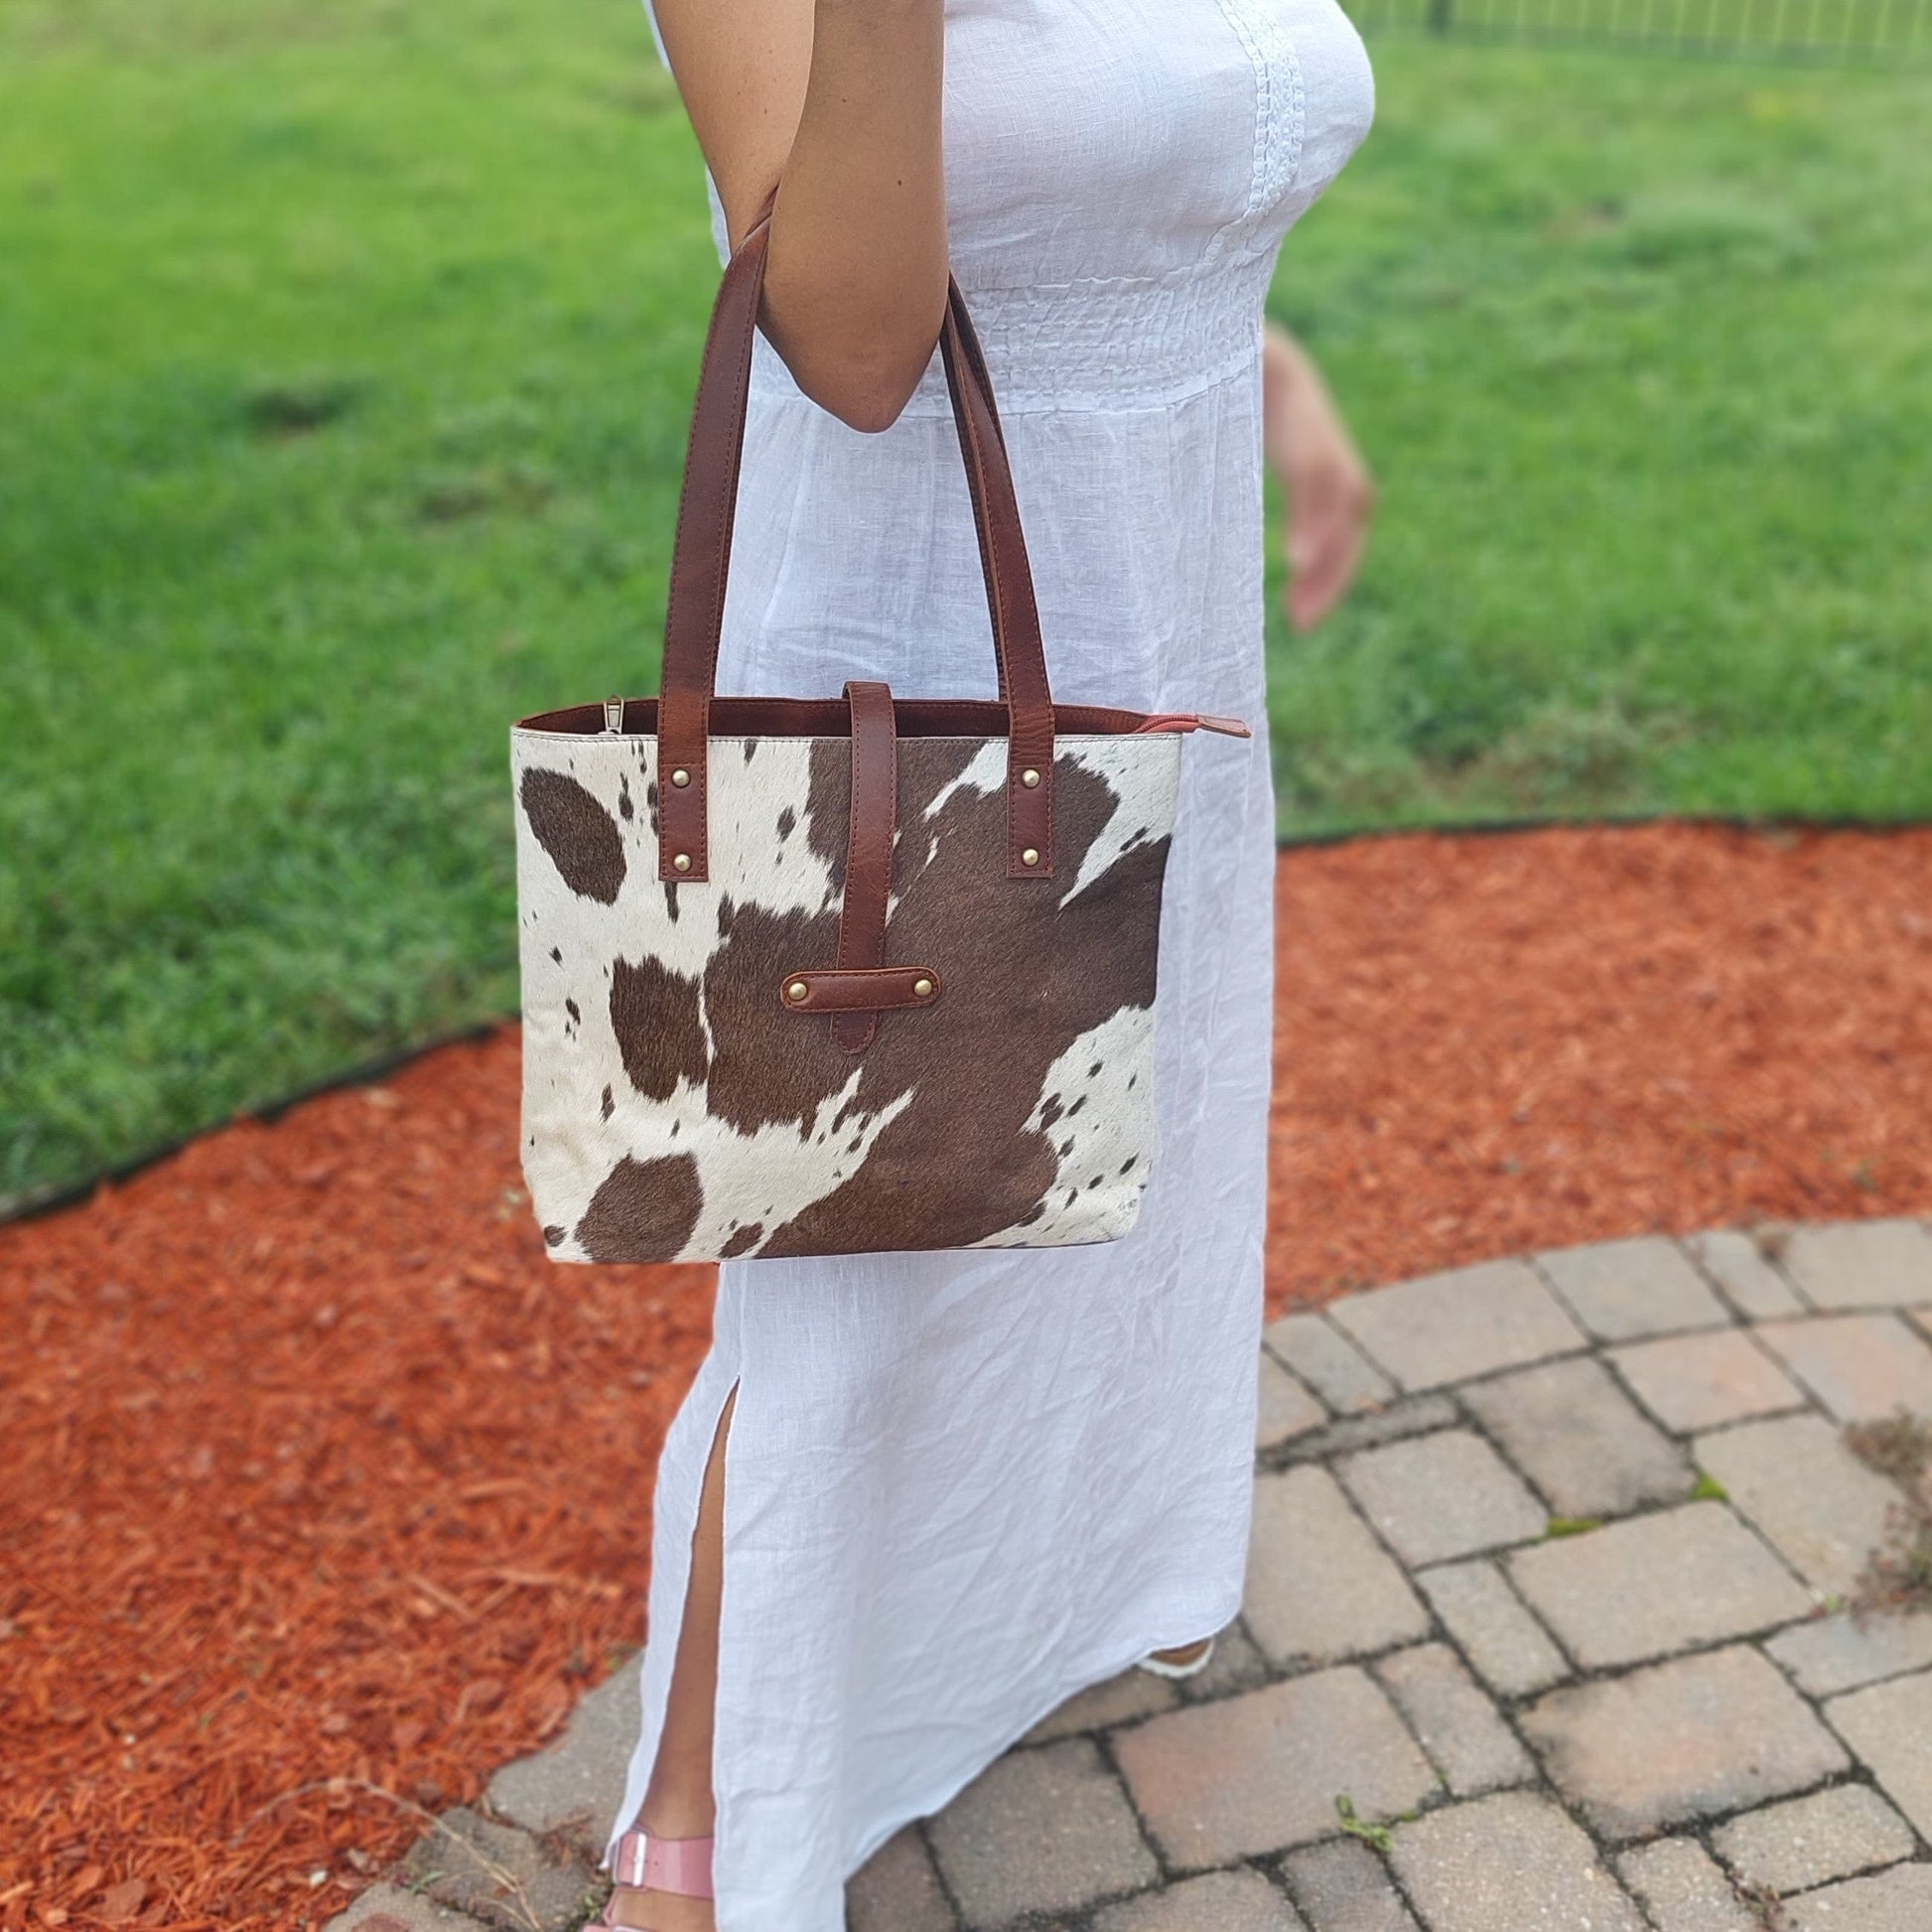 lady holding cowhide and leather handbag on crook of arm